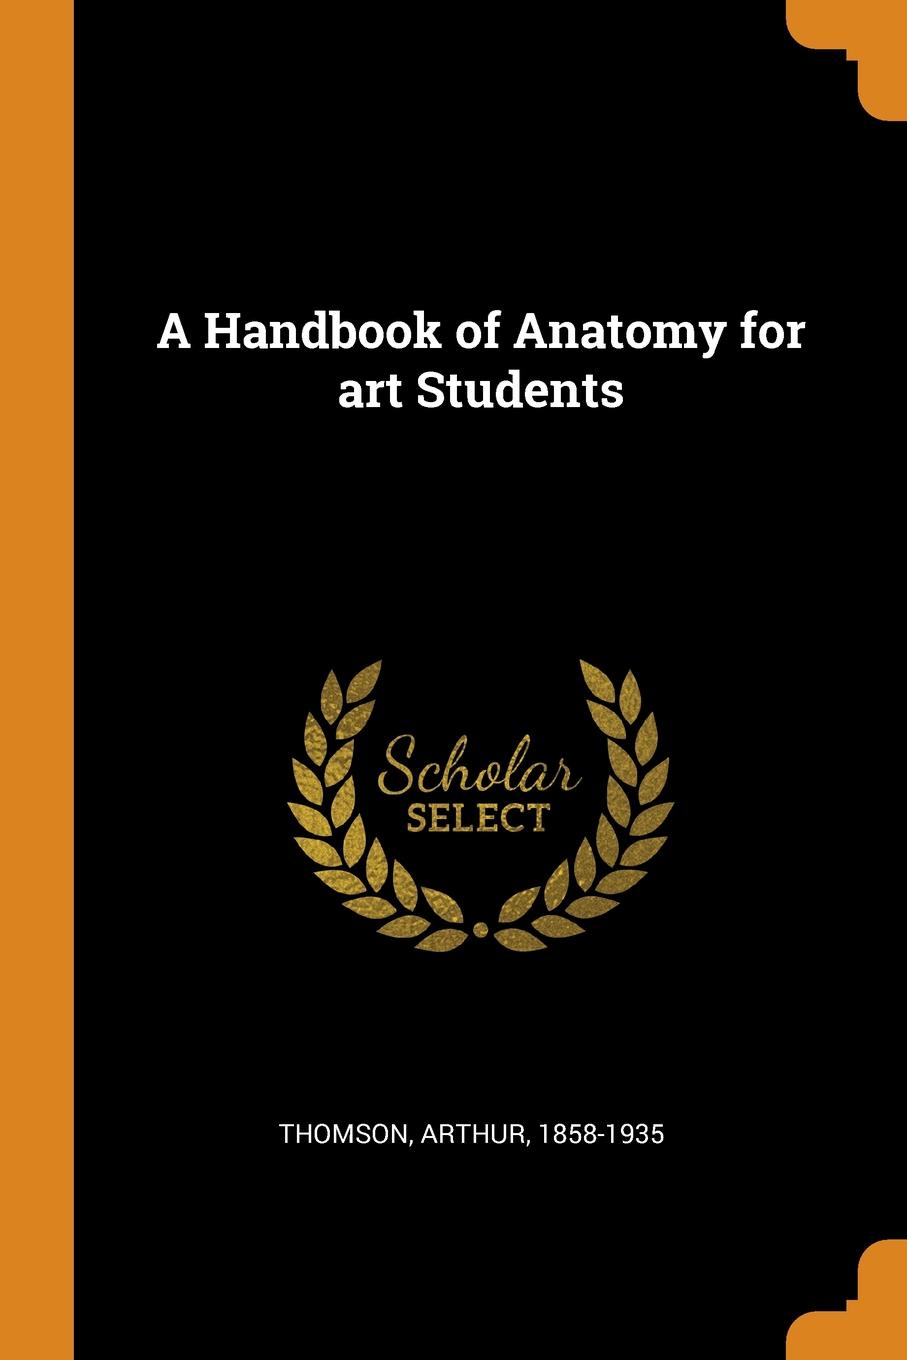 A Handbook of Anatomy for art Students